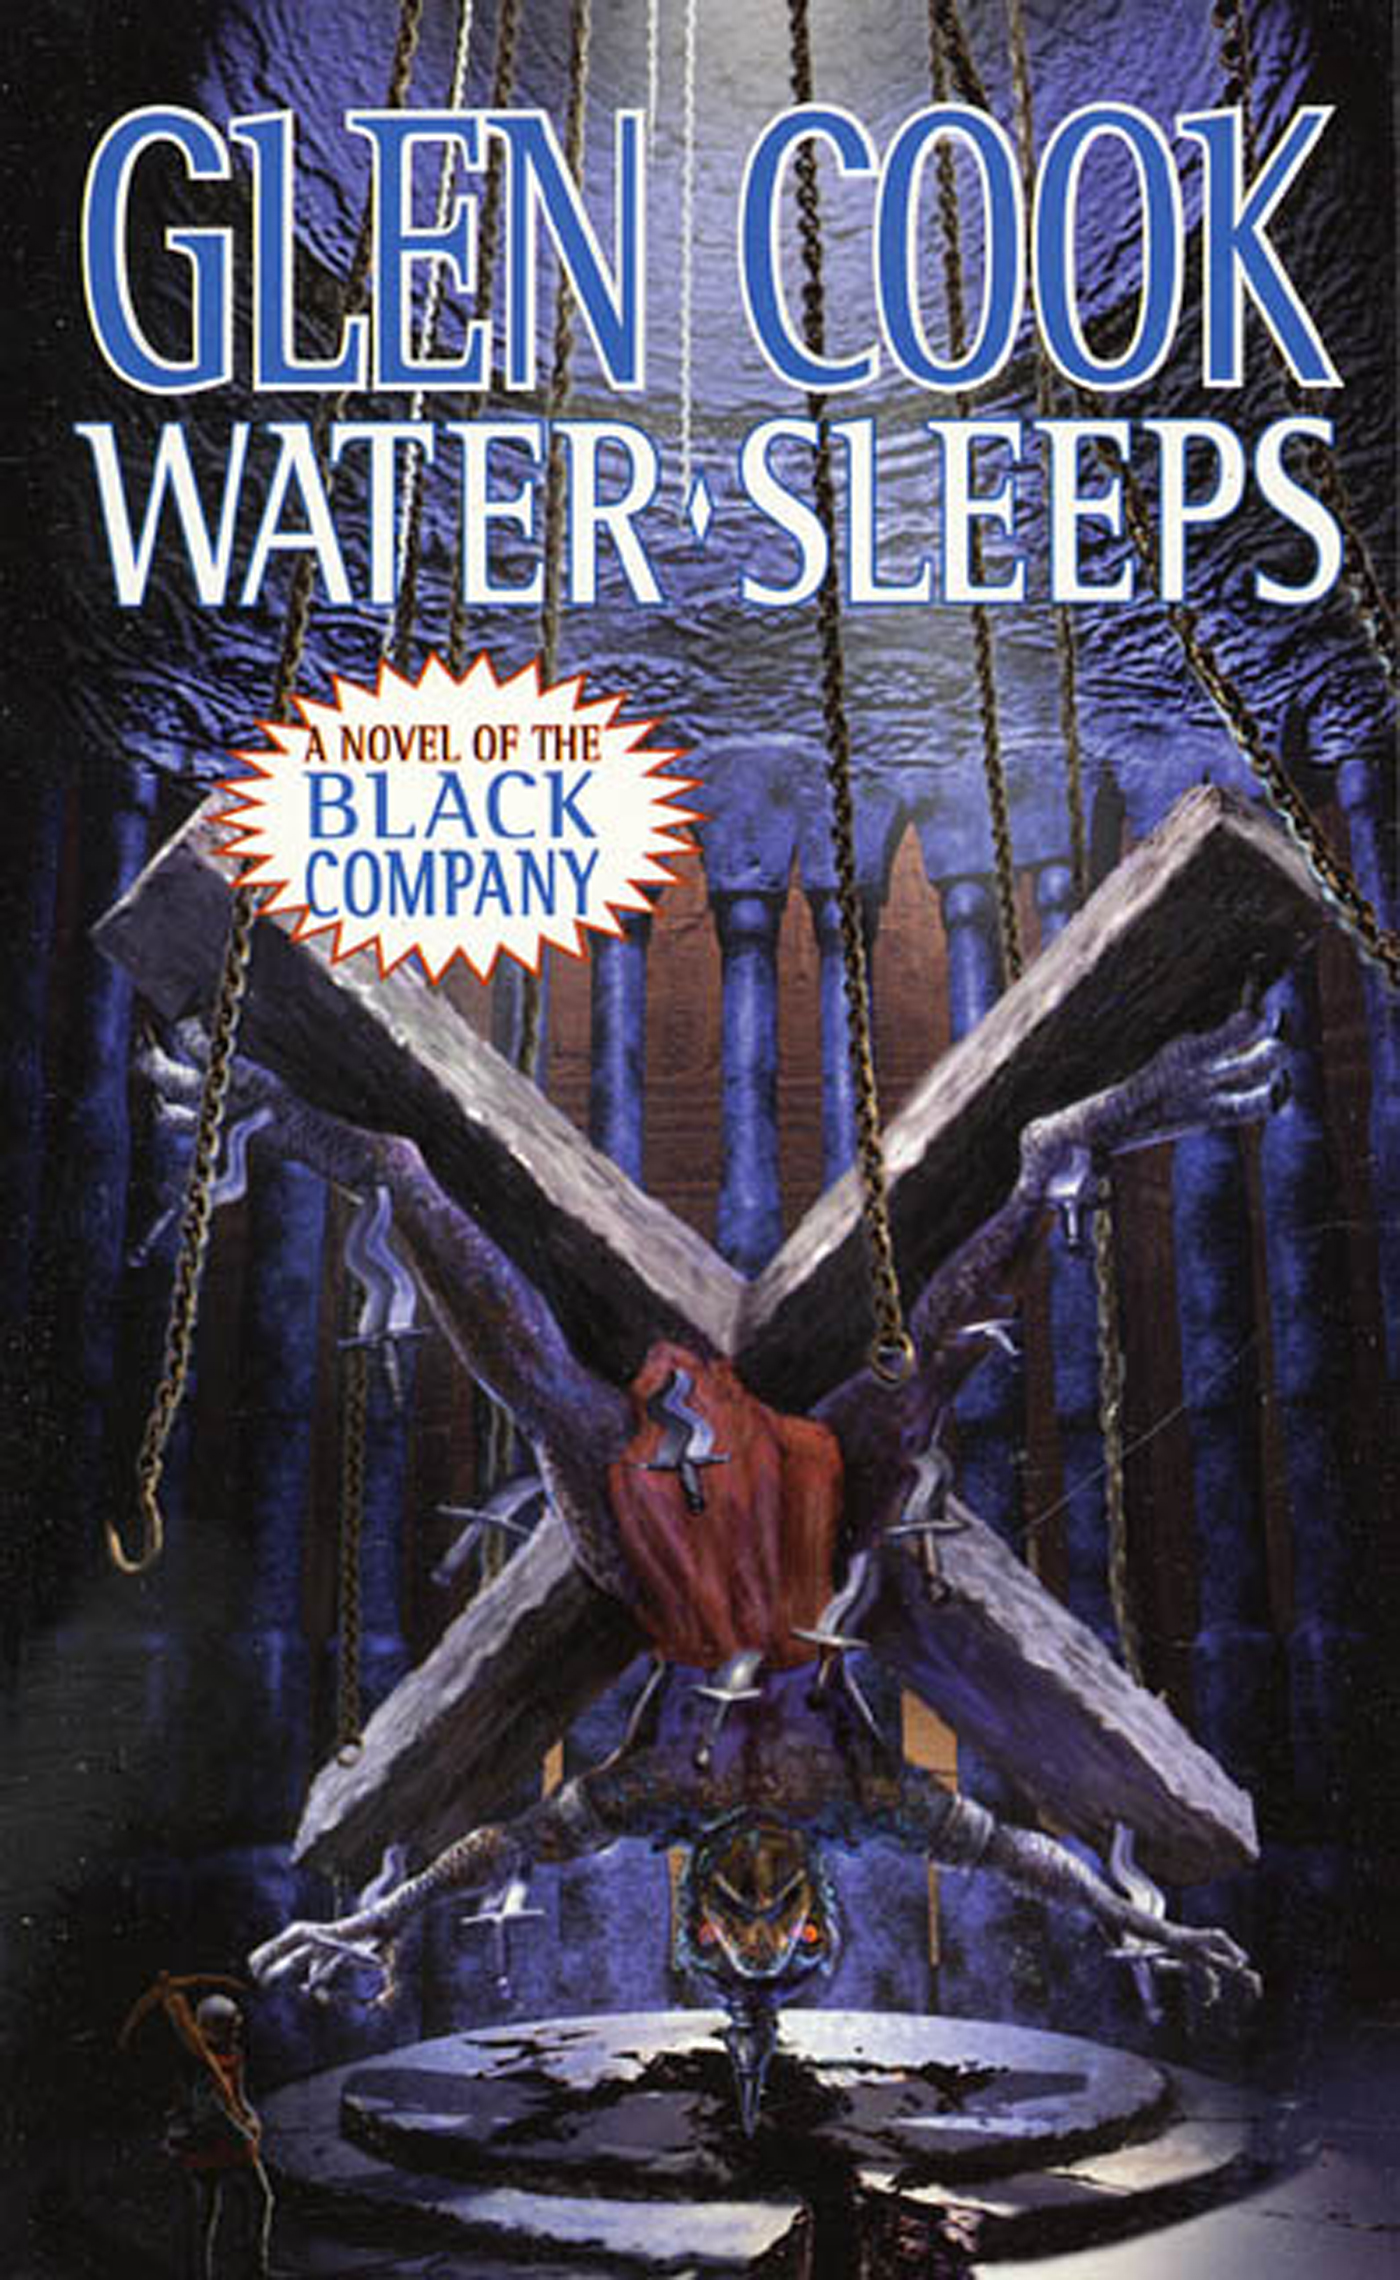 Water Sleeps : A Novel of the Black Company by Glen Cook